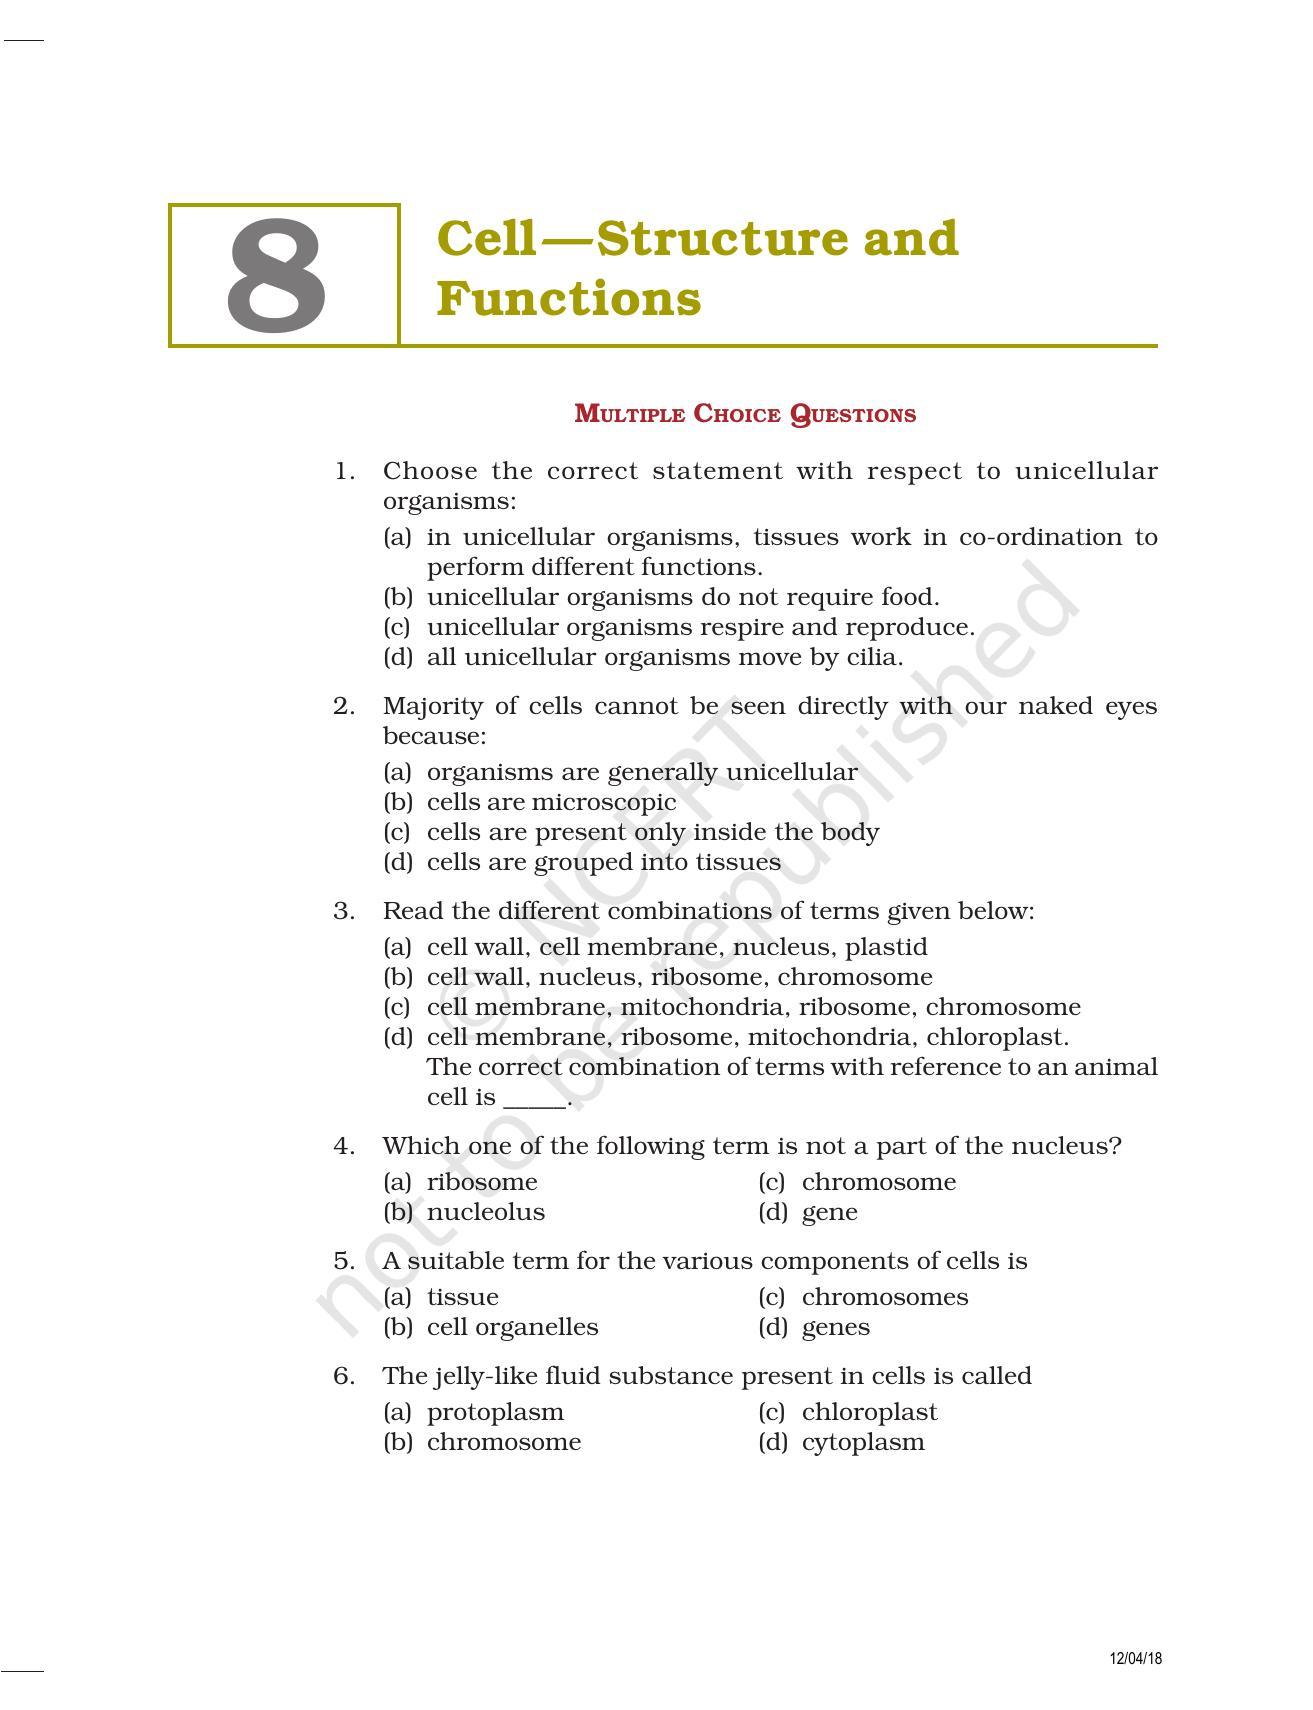 NCERT Exemplar Book for Class 8 Science: Chapter 8- Cell—Structure and Functions - Page 1